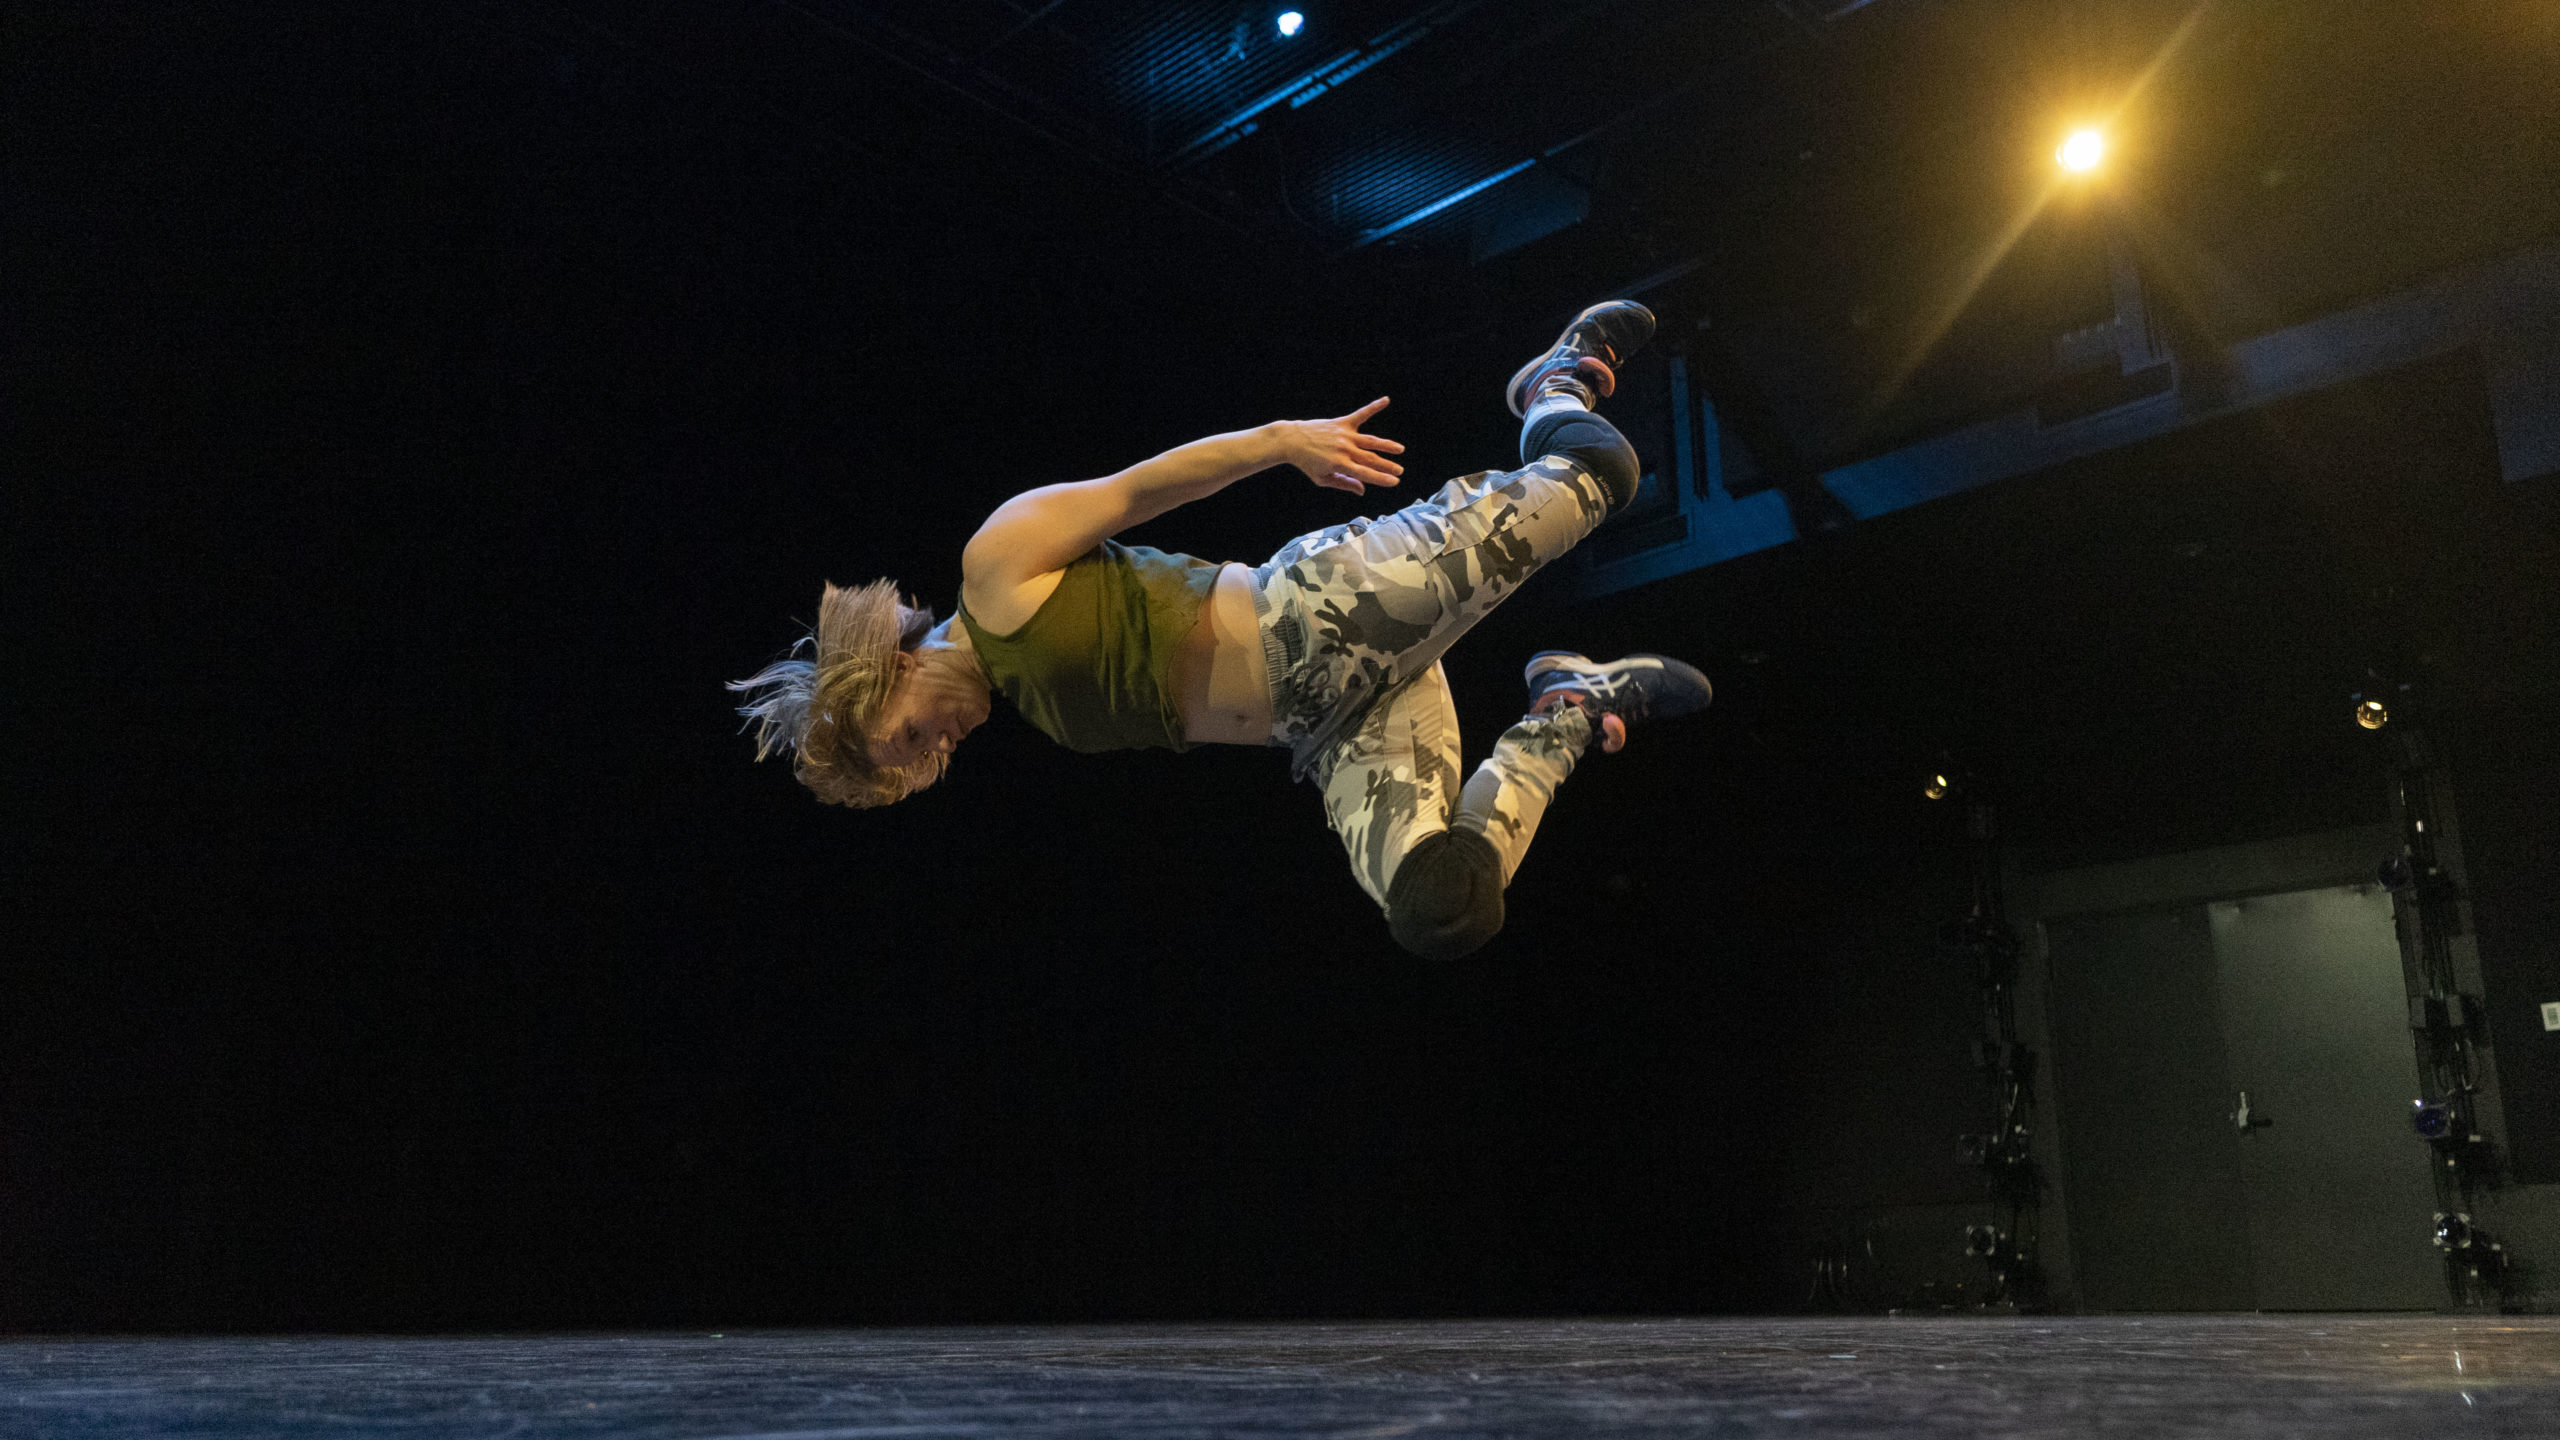 A dancer is caught mid-air, body parallel to the ground. Their arms are thrust behind them, knees kicked up. It seems impossible that they could catch themself before crashing to the ground.